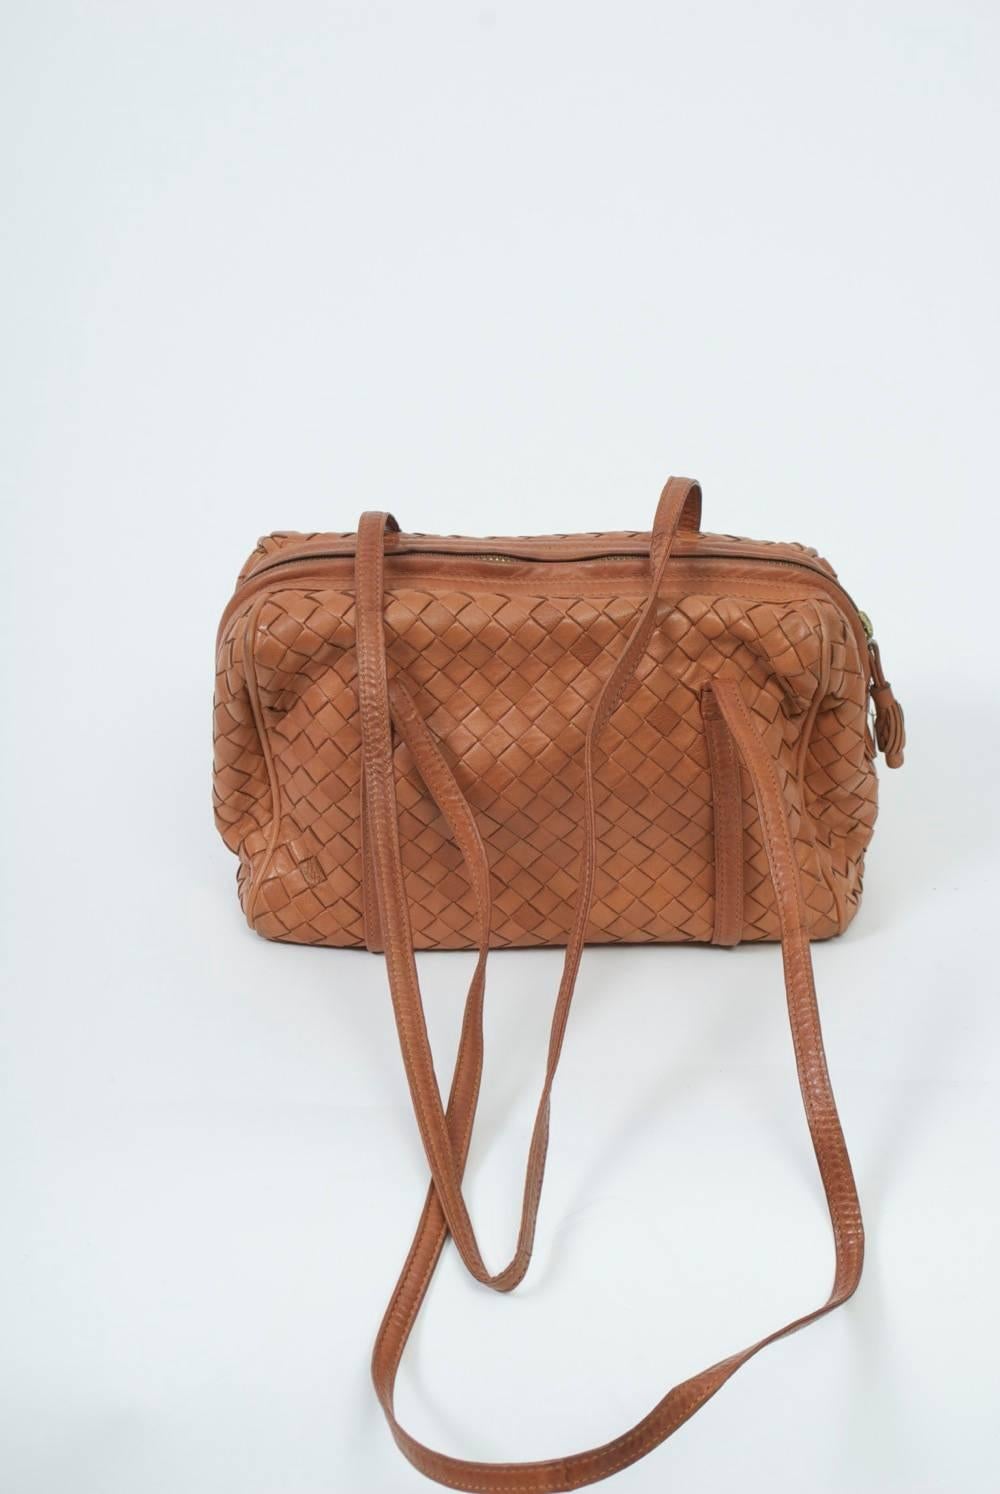 Double-strap luggage shoulder bag in its signature woven leather by Bottega Veneta. Satchel style with soft body and narrow straps that encircle the bag. Long zipper across top and zippered compartment on interior with logo plate.